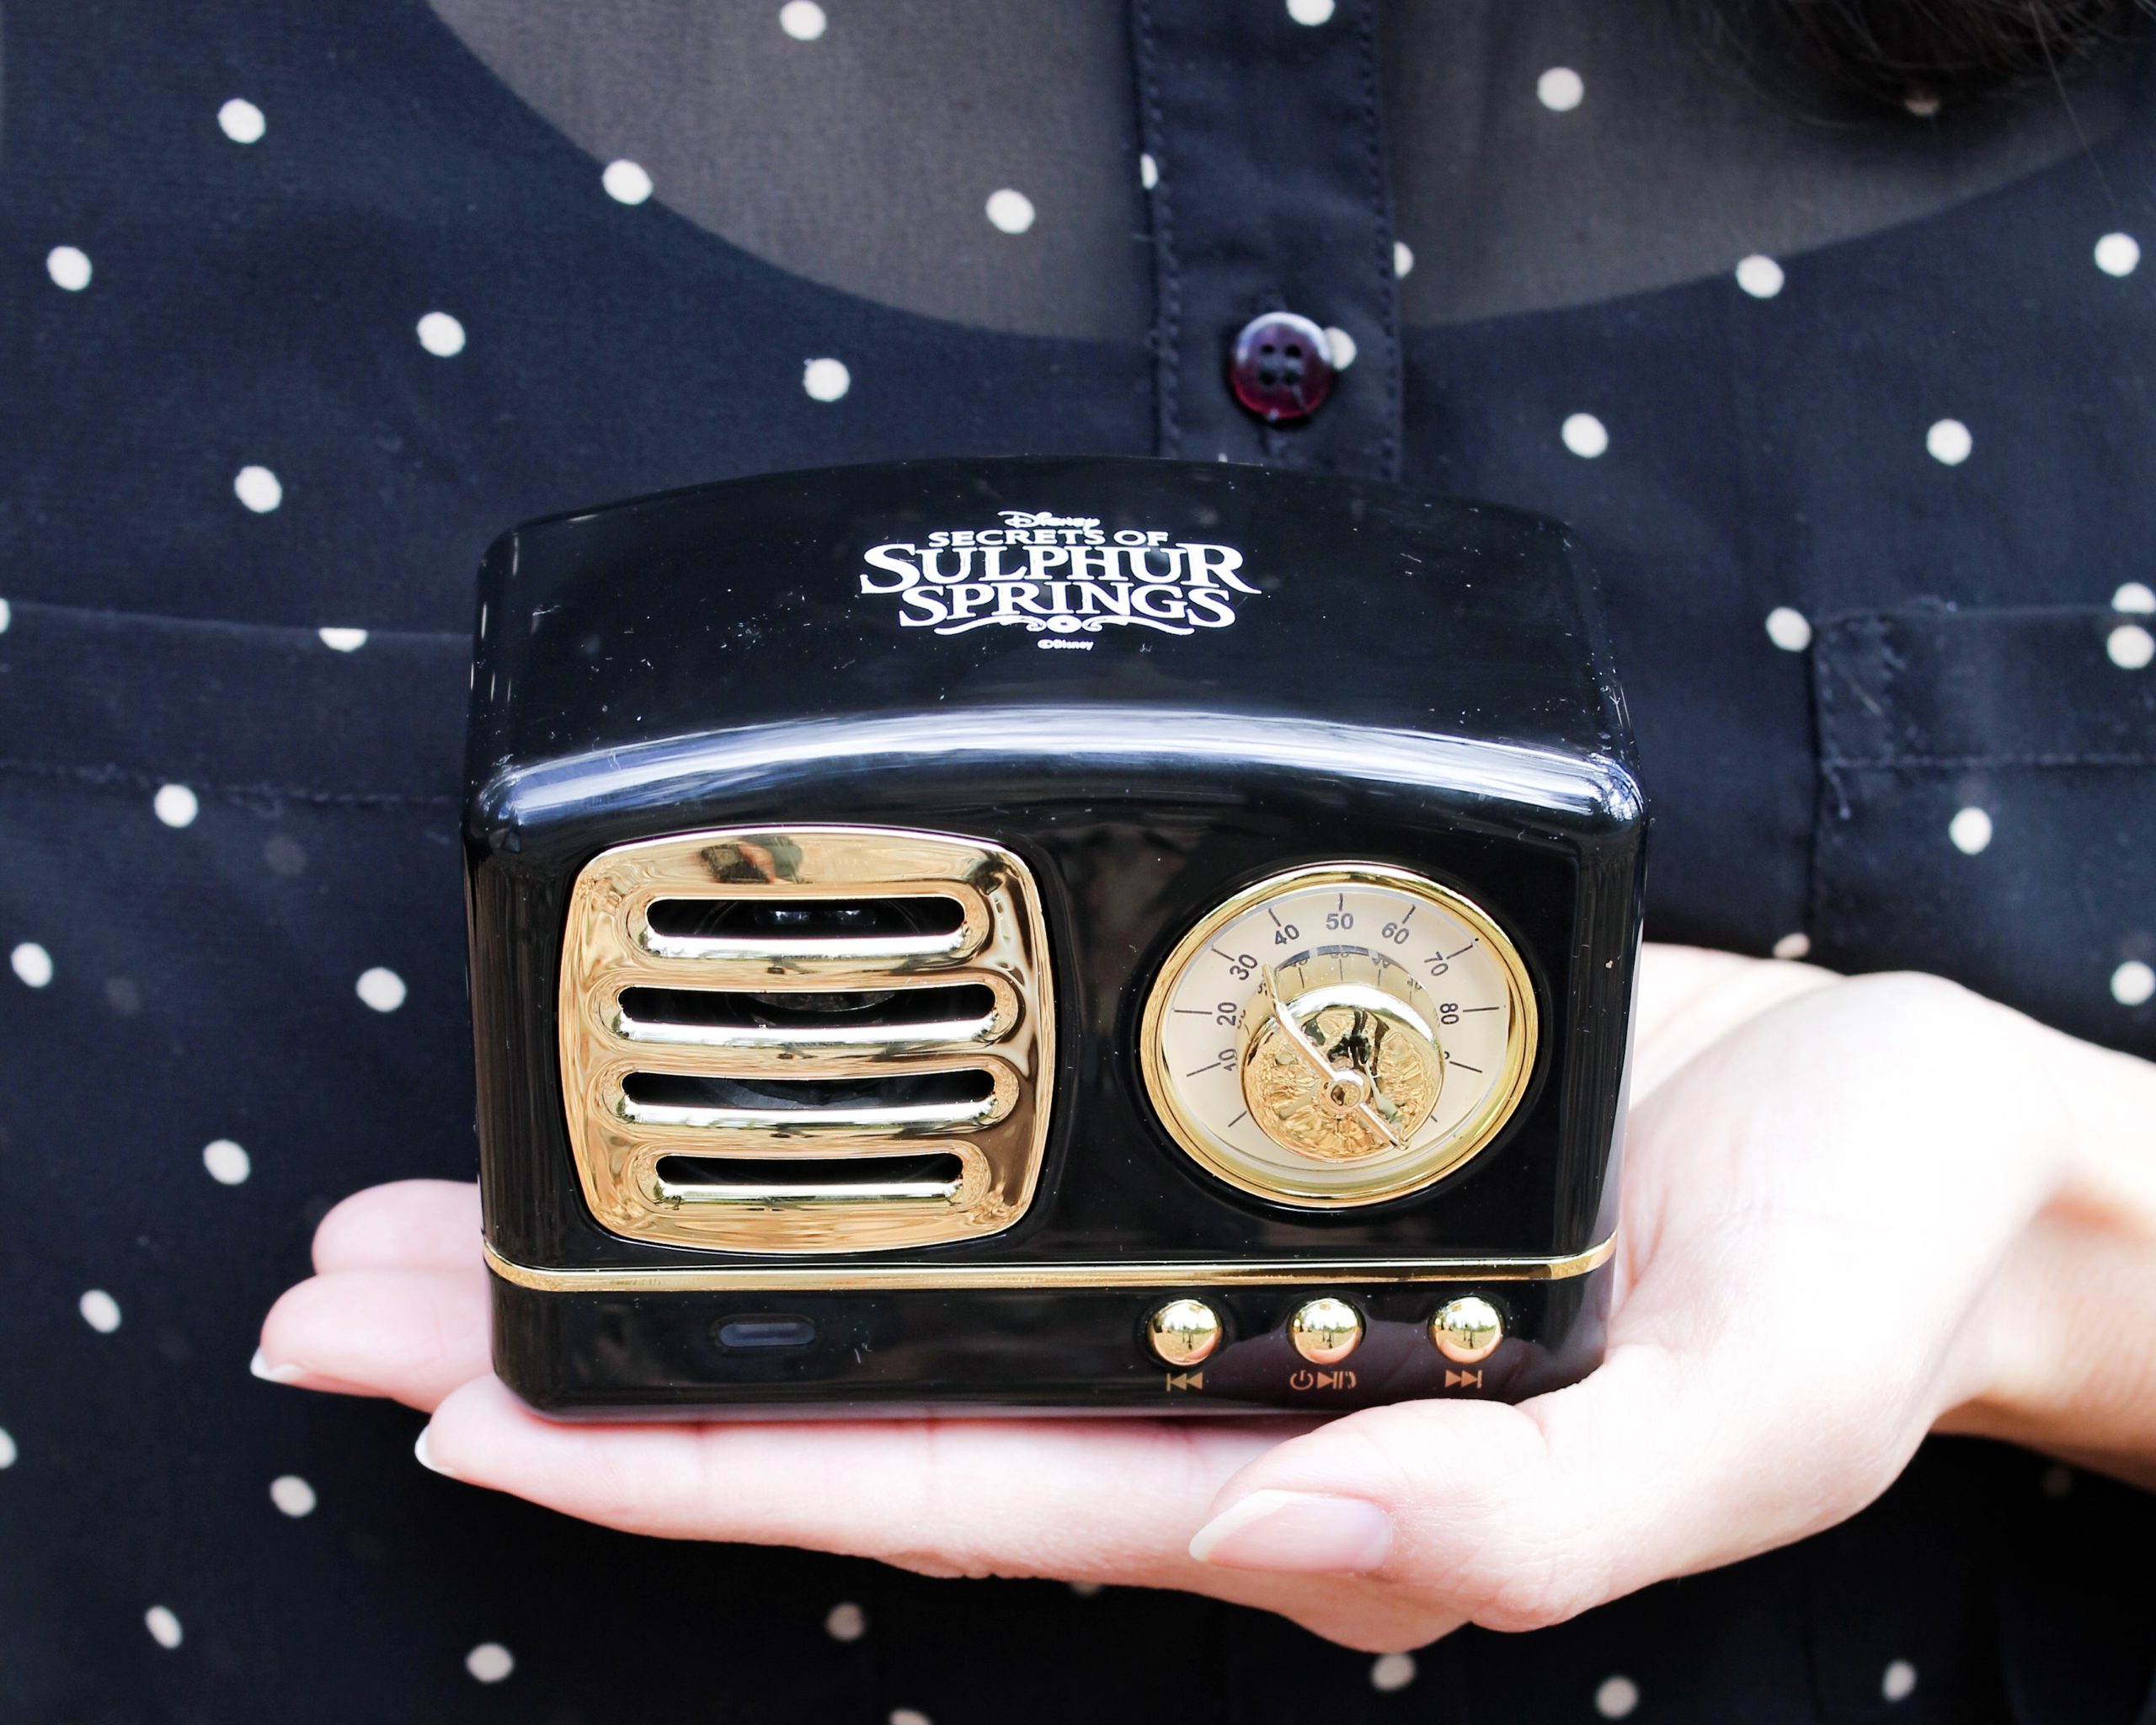 Casey holds a bluetooth speaker in the shape of a miniature replica of the time travel radio device from Disney Channel's Secrets Of Sulphur Springs